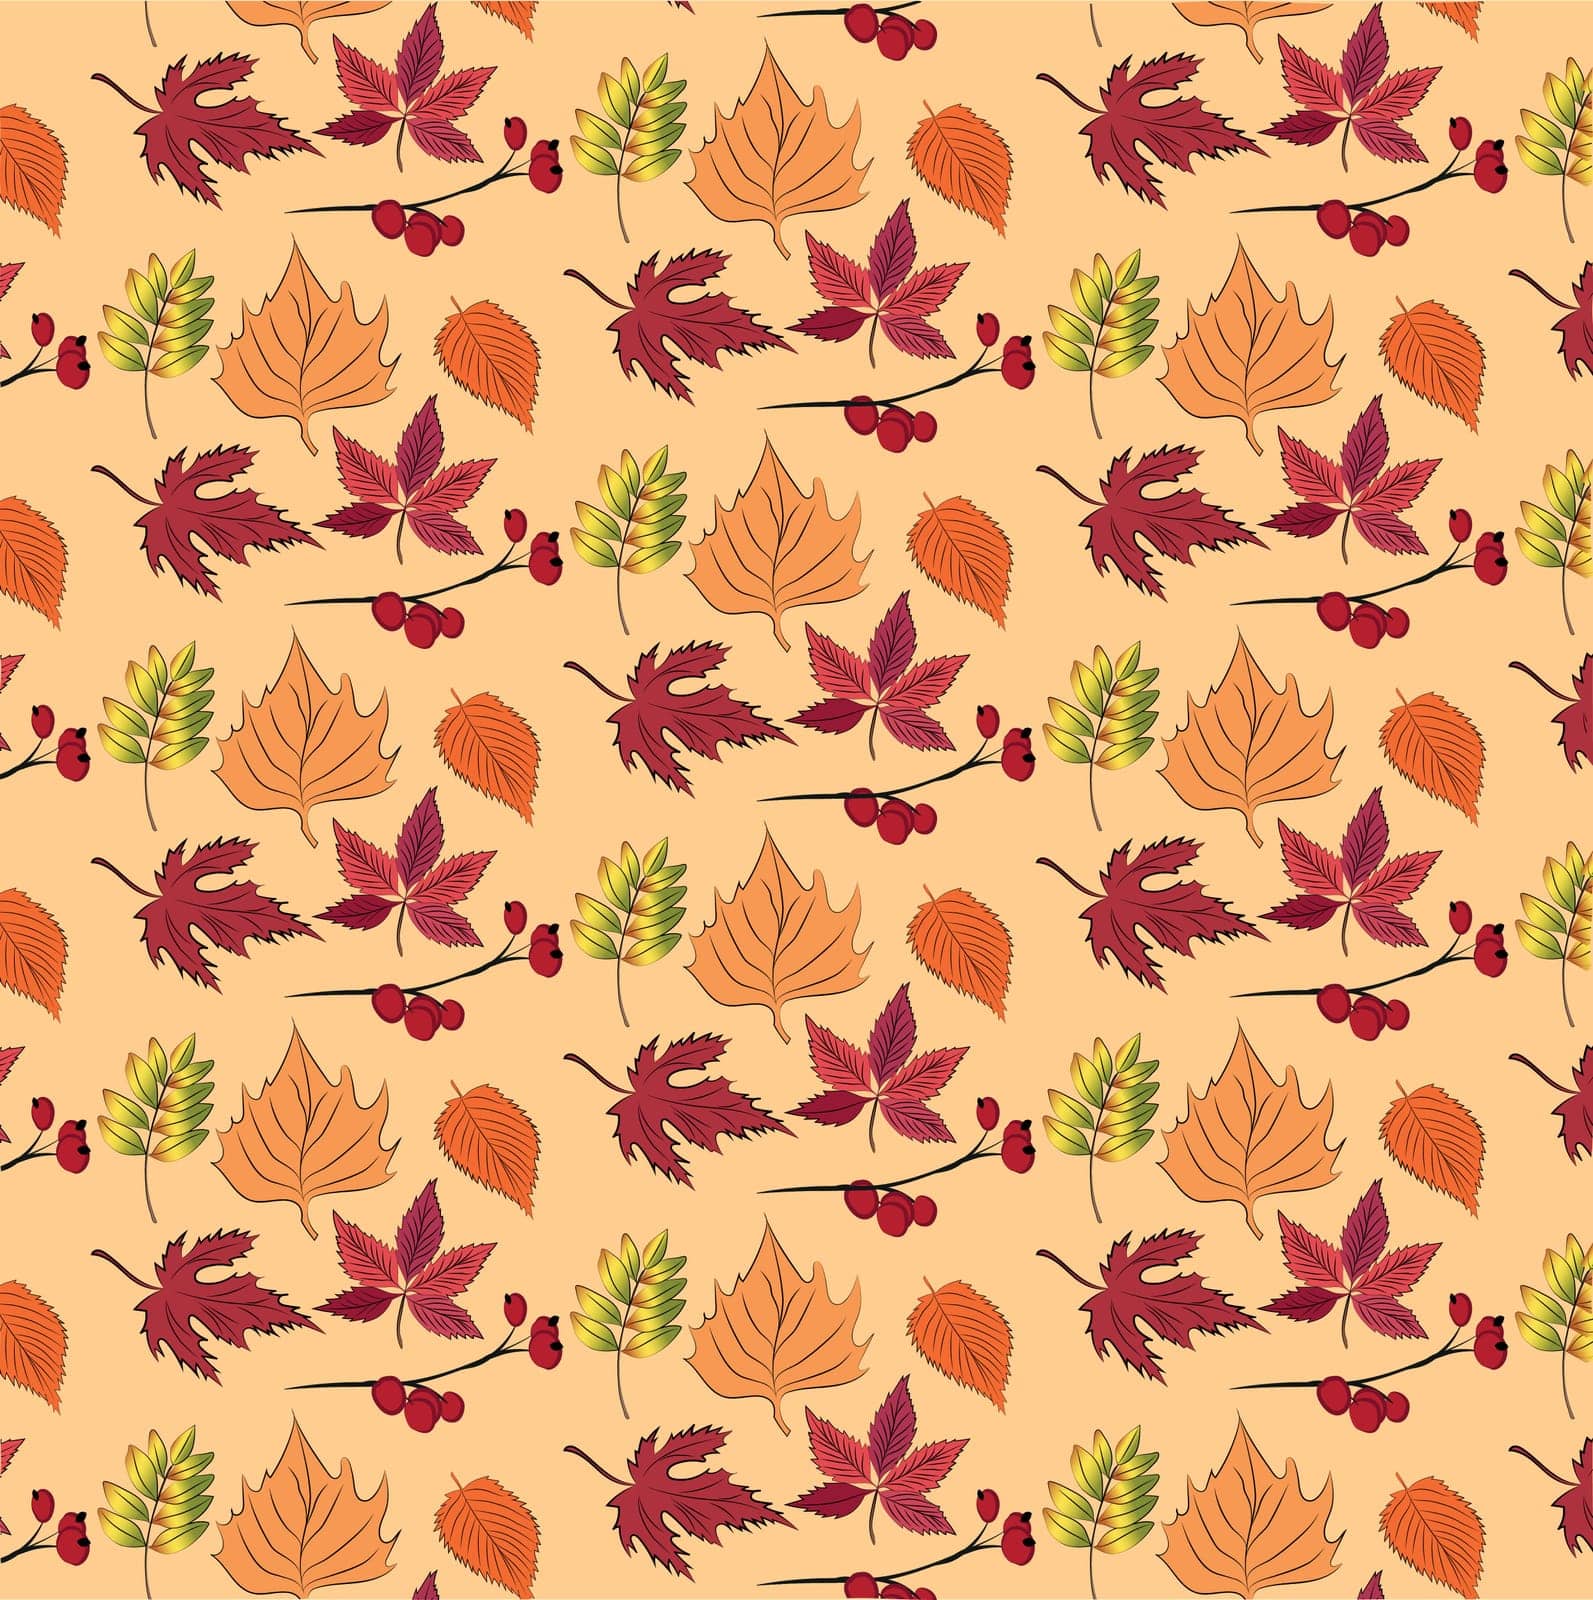 Autumn pumpkins with teal background pattern. Maple leaves, sunflowers, flowers ditsy. Perfect for fall, Thanksgiving, holidays, fabric, textile. Seamless repeat swatch. Vector illustration